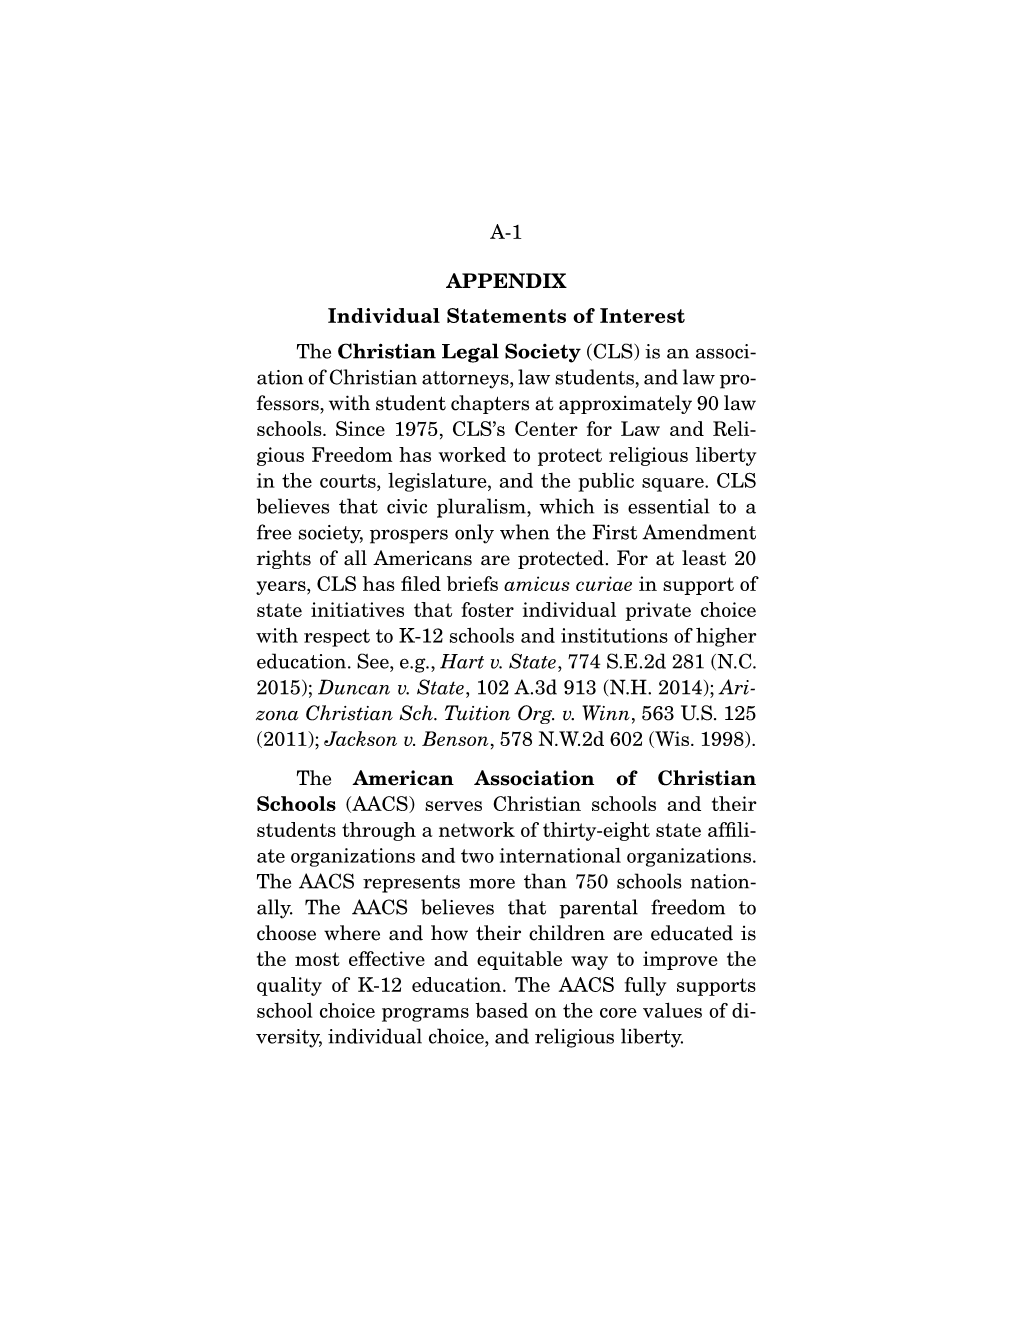 A-1 APPENDIX Individual Statements of Interest the Christian Legal Society